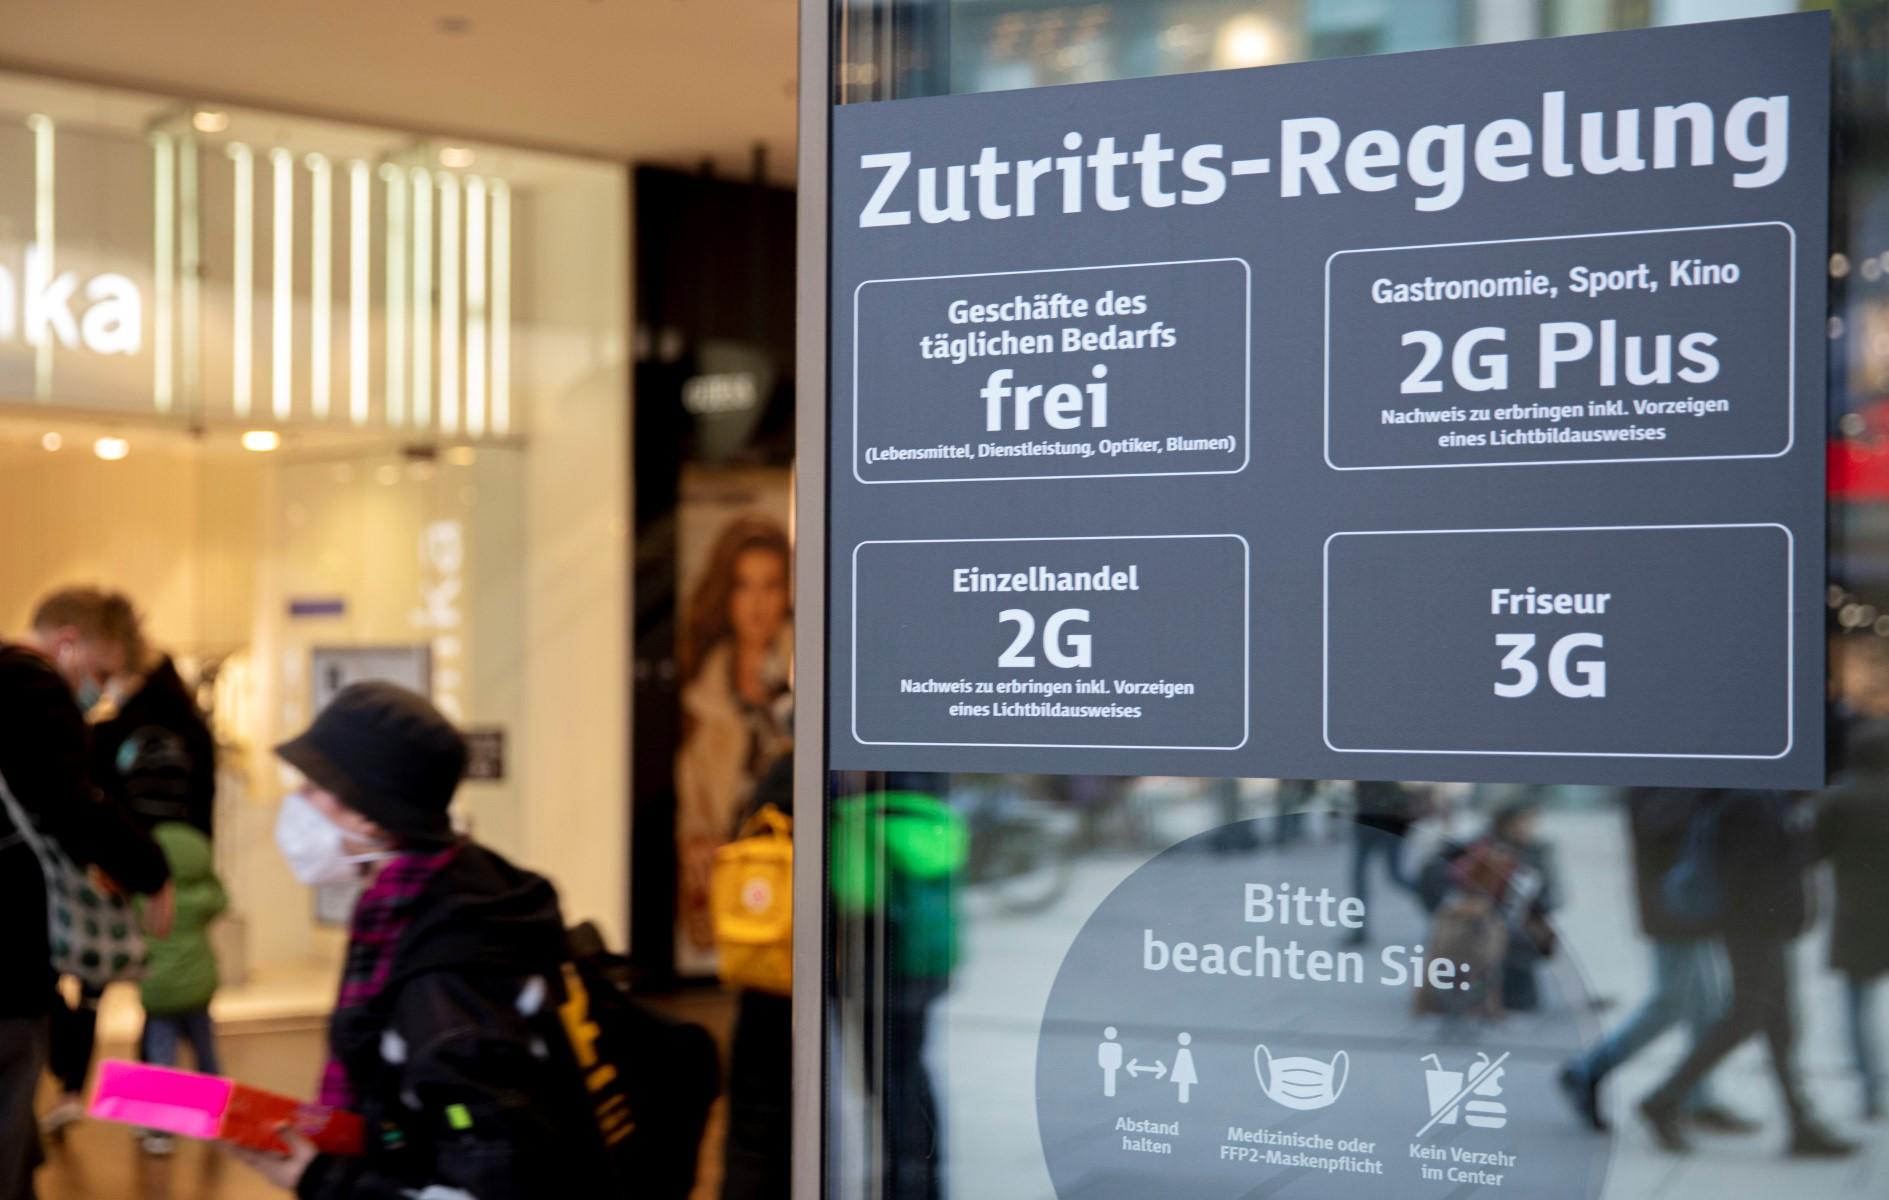 A sign is pictured at the entrance of a shop informing the public of the so-called Covid-19 '2G rules' allowing only vaccinated or recovered people to enter the store in Frankfurt am Main, western Germany, on Feb 3. Photo: AFP